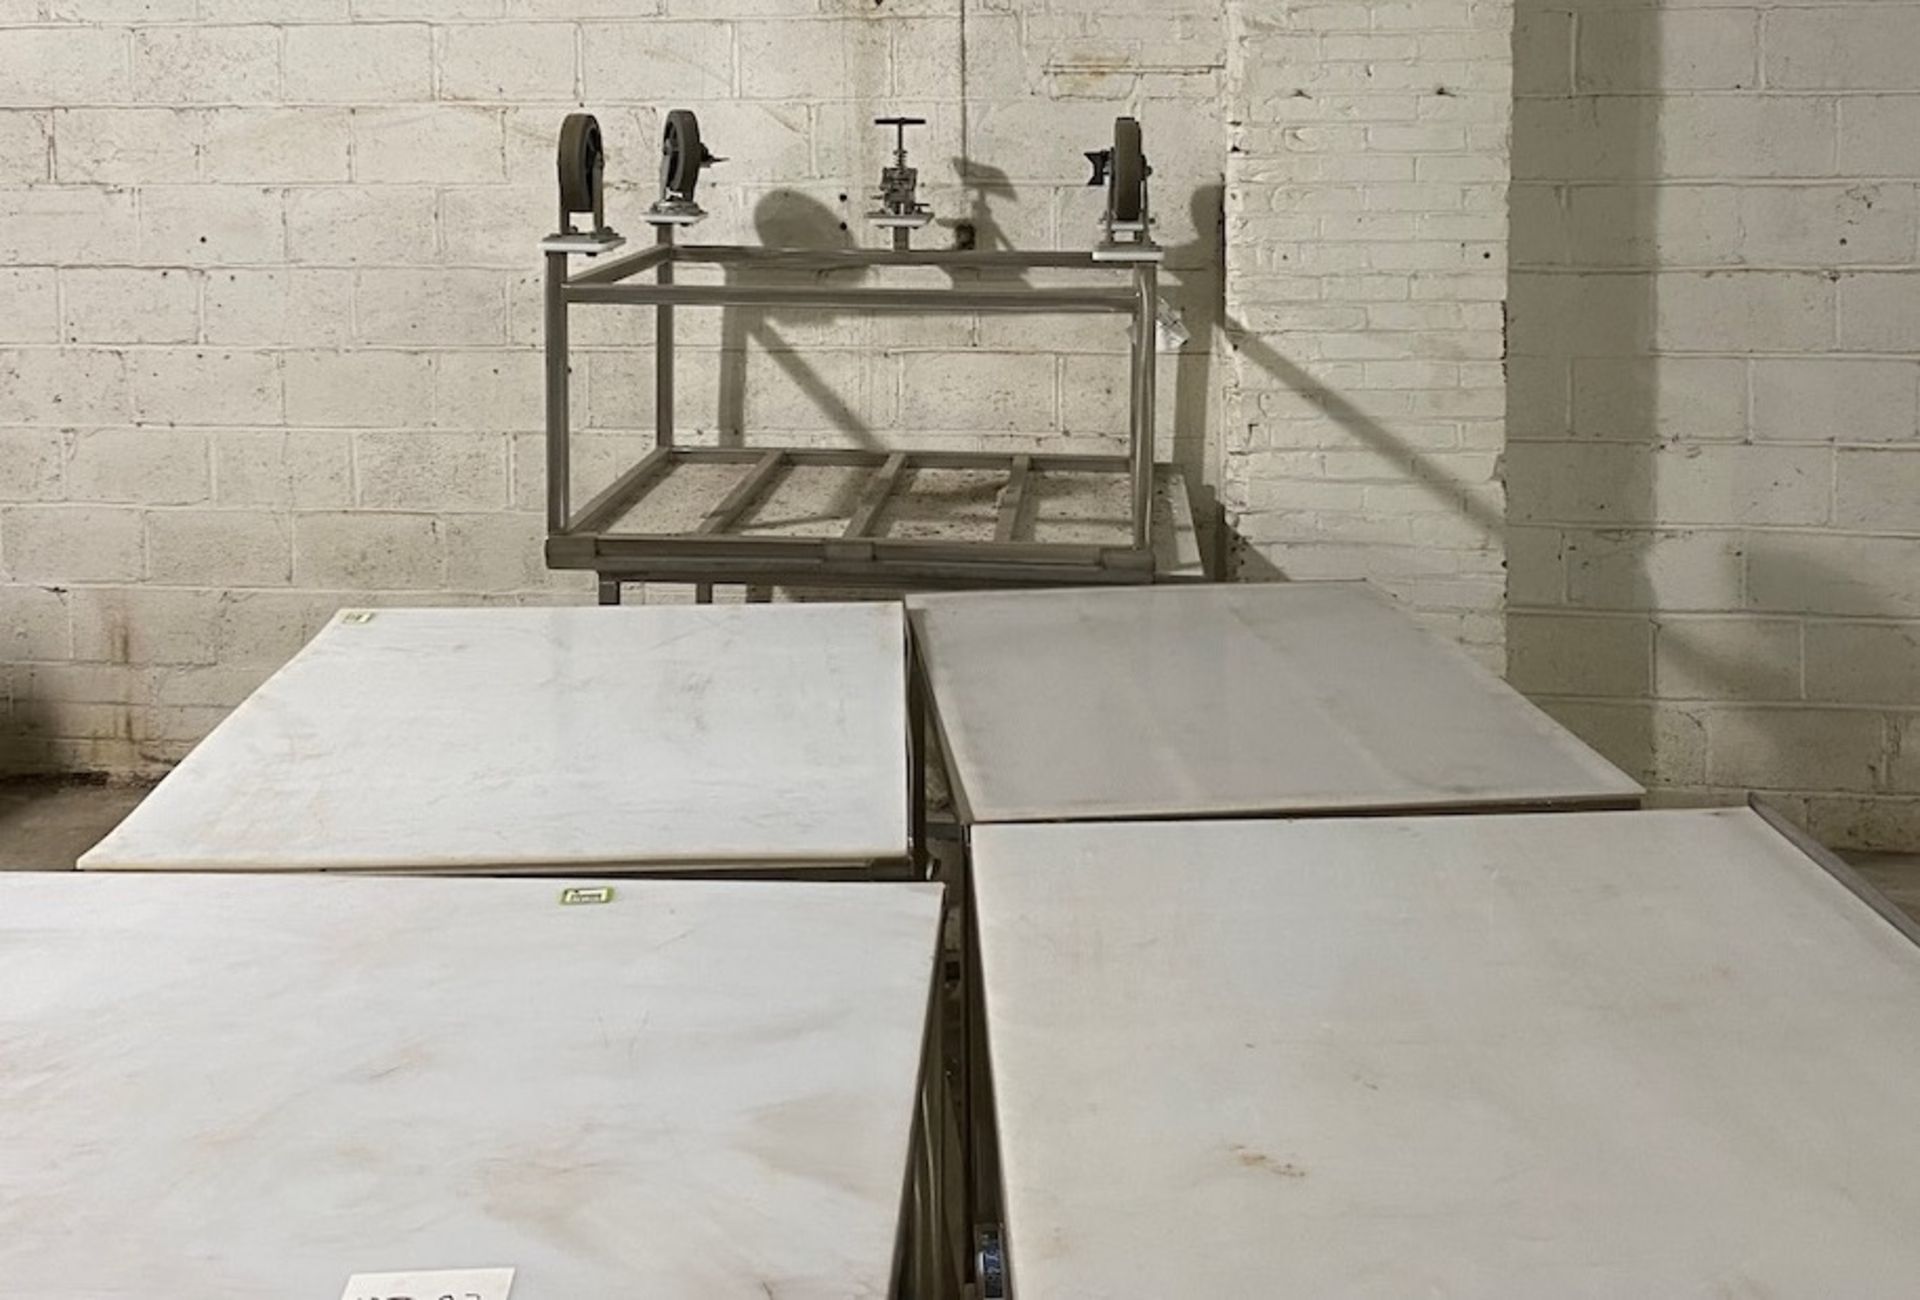 Lot of six Stainless Tables with Plastic Tops - Image 3 of 5